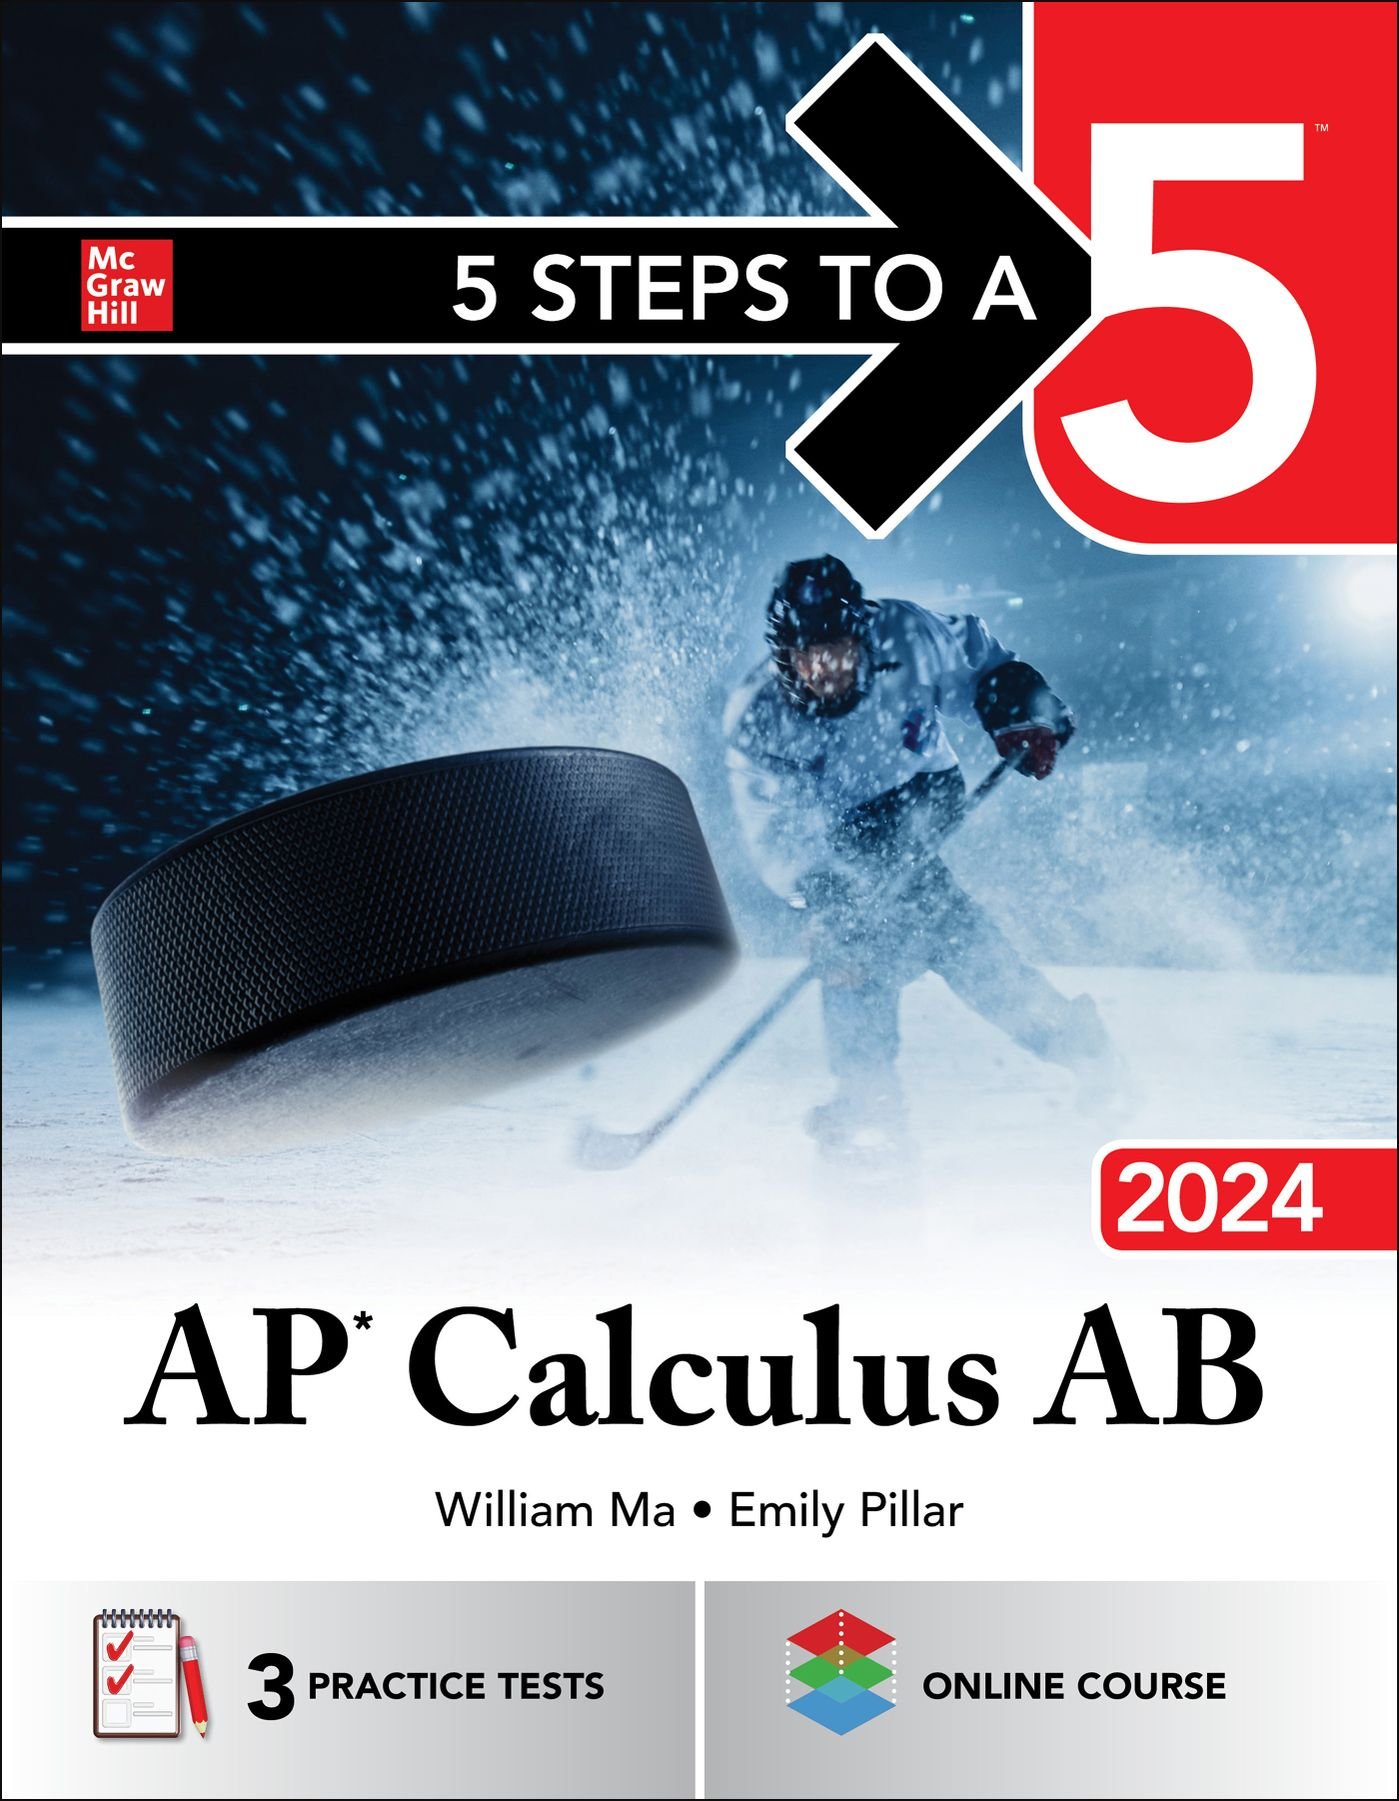 5 Steps to a 5 AP Calculus AB 2024 SoftArchive